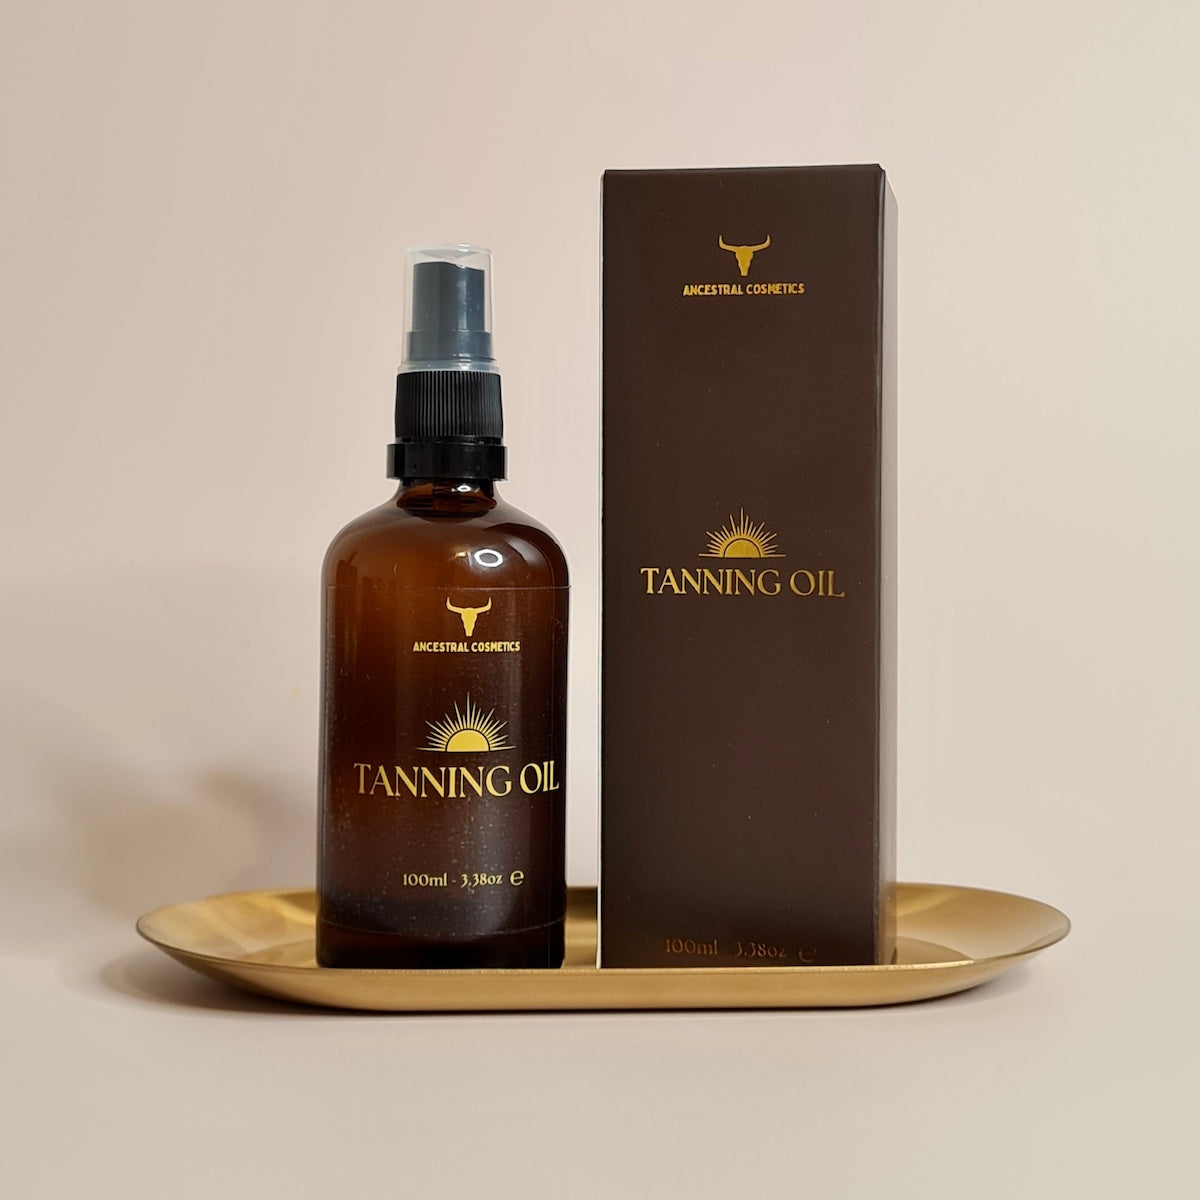 Ancestral Tanning Oil – Ancestral Cosmetics